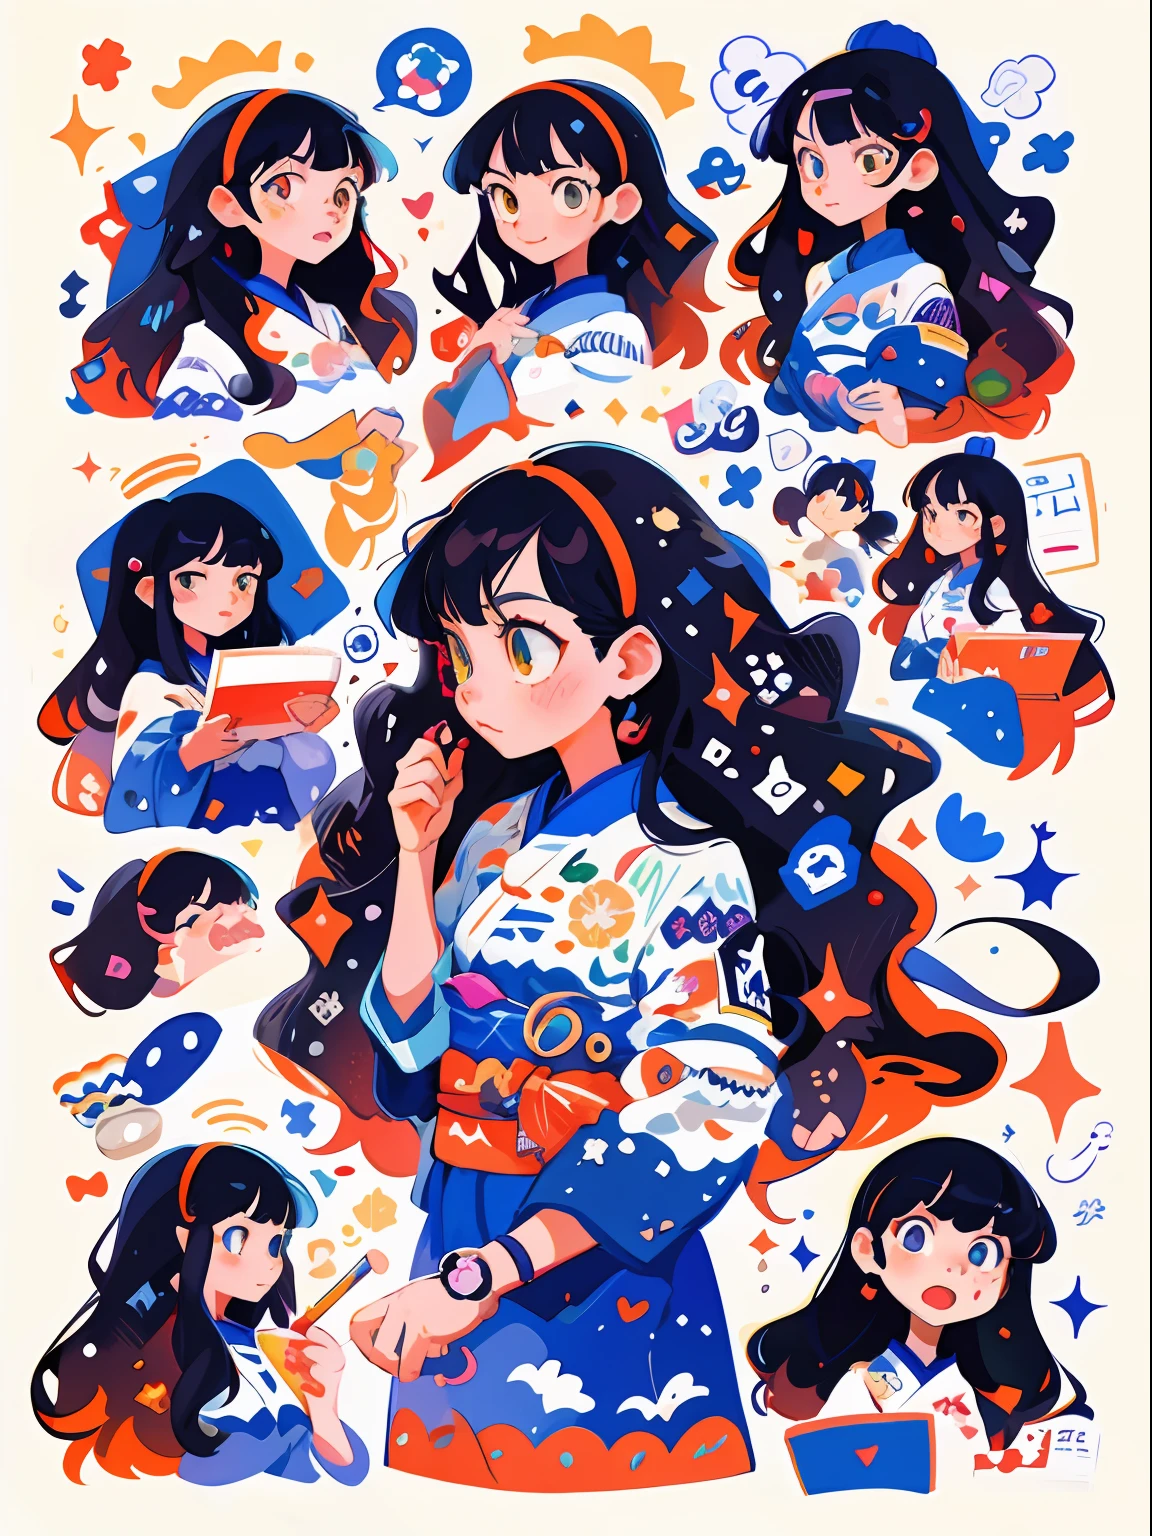 a drawing，A girl with a lot of different expressions on her face, japanese illustrator, Illustration style, lovely art style, Colorful illustration, Digital anime illustration, colorful illustrations, cute detailed artwork, cute illustration, Anime style illustration, 2 d illustration, 2 d gouache illustration, 2D illustration, author：Ryan Yee, anime graphic illustration, 2d digital illustration, anime illustration